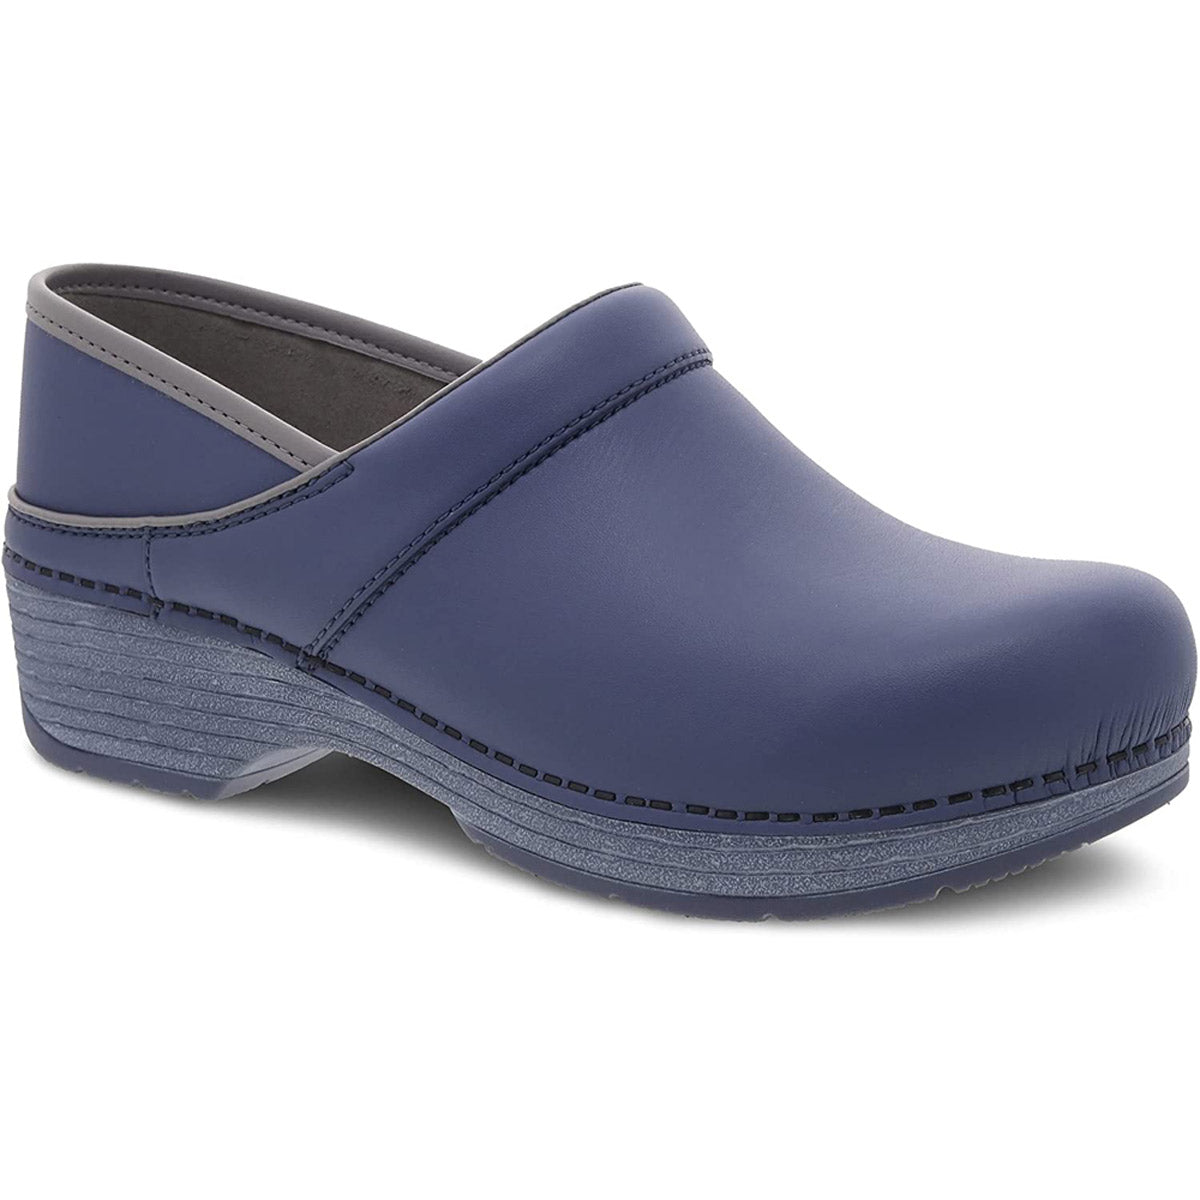 Products - Lamey - 3 col-blue | Wellehan Shoes